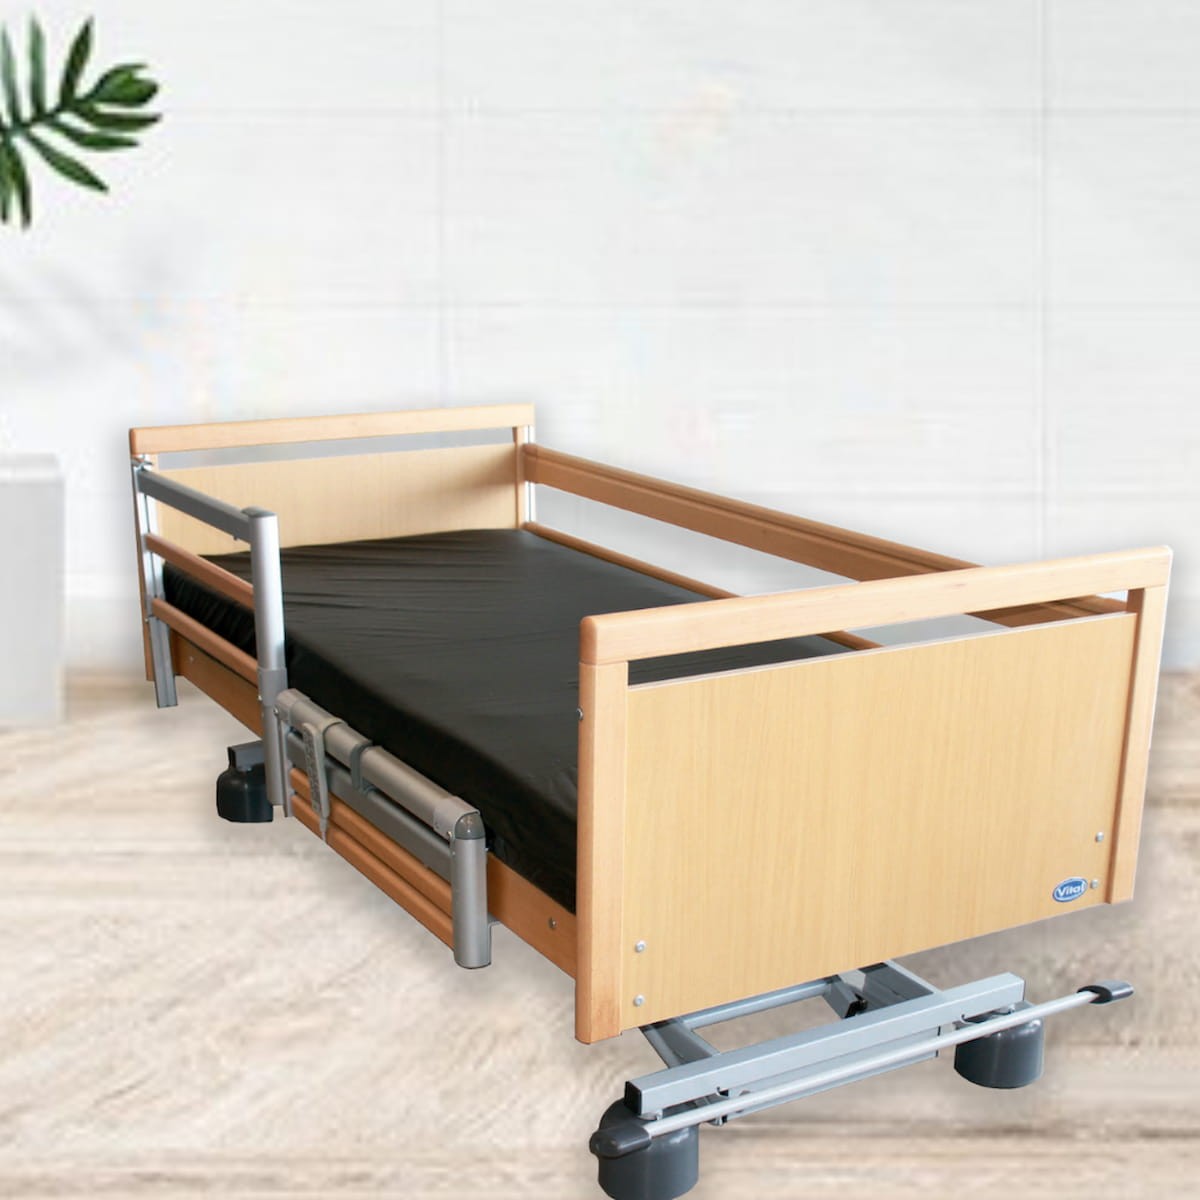 Full Electric Hospital Beds